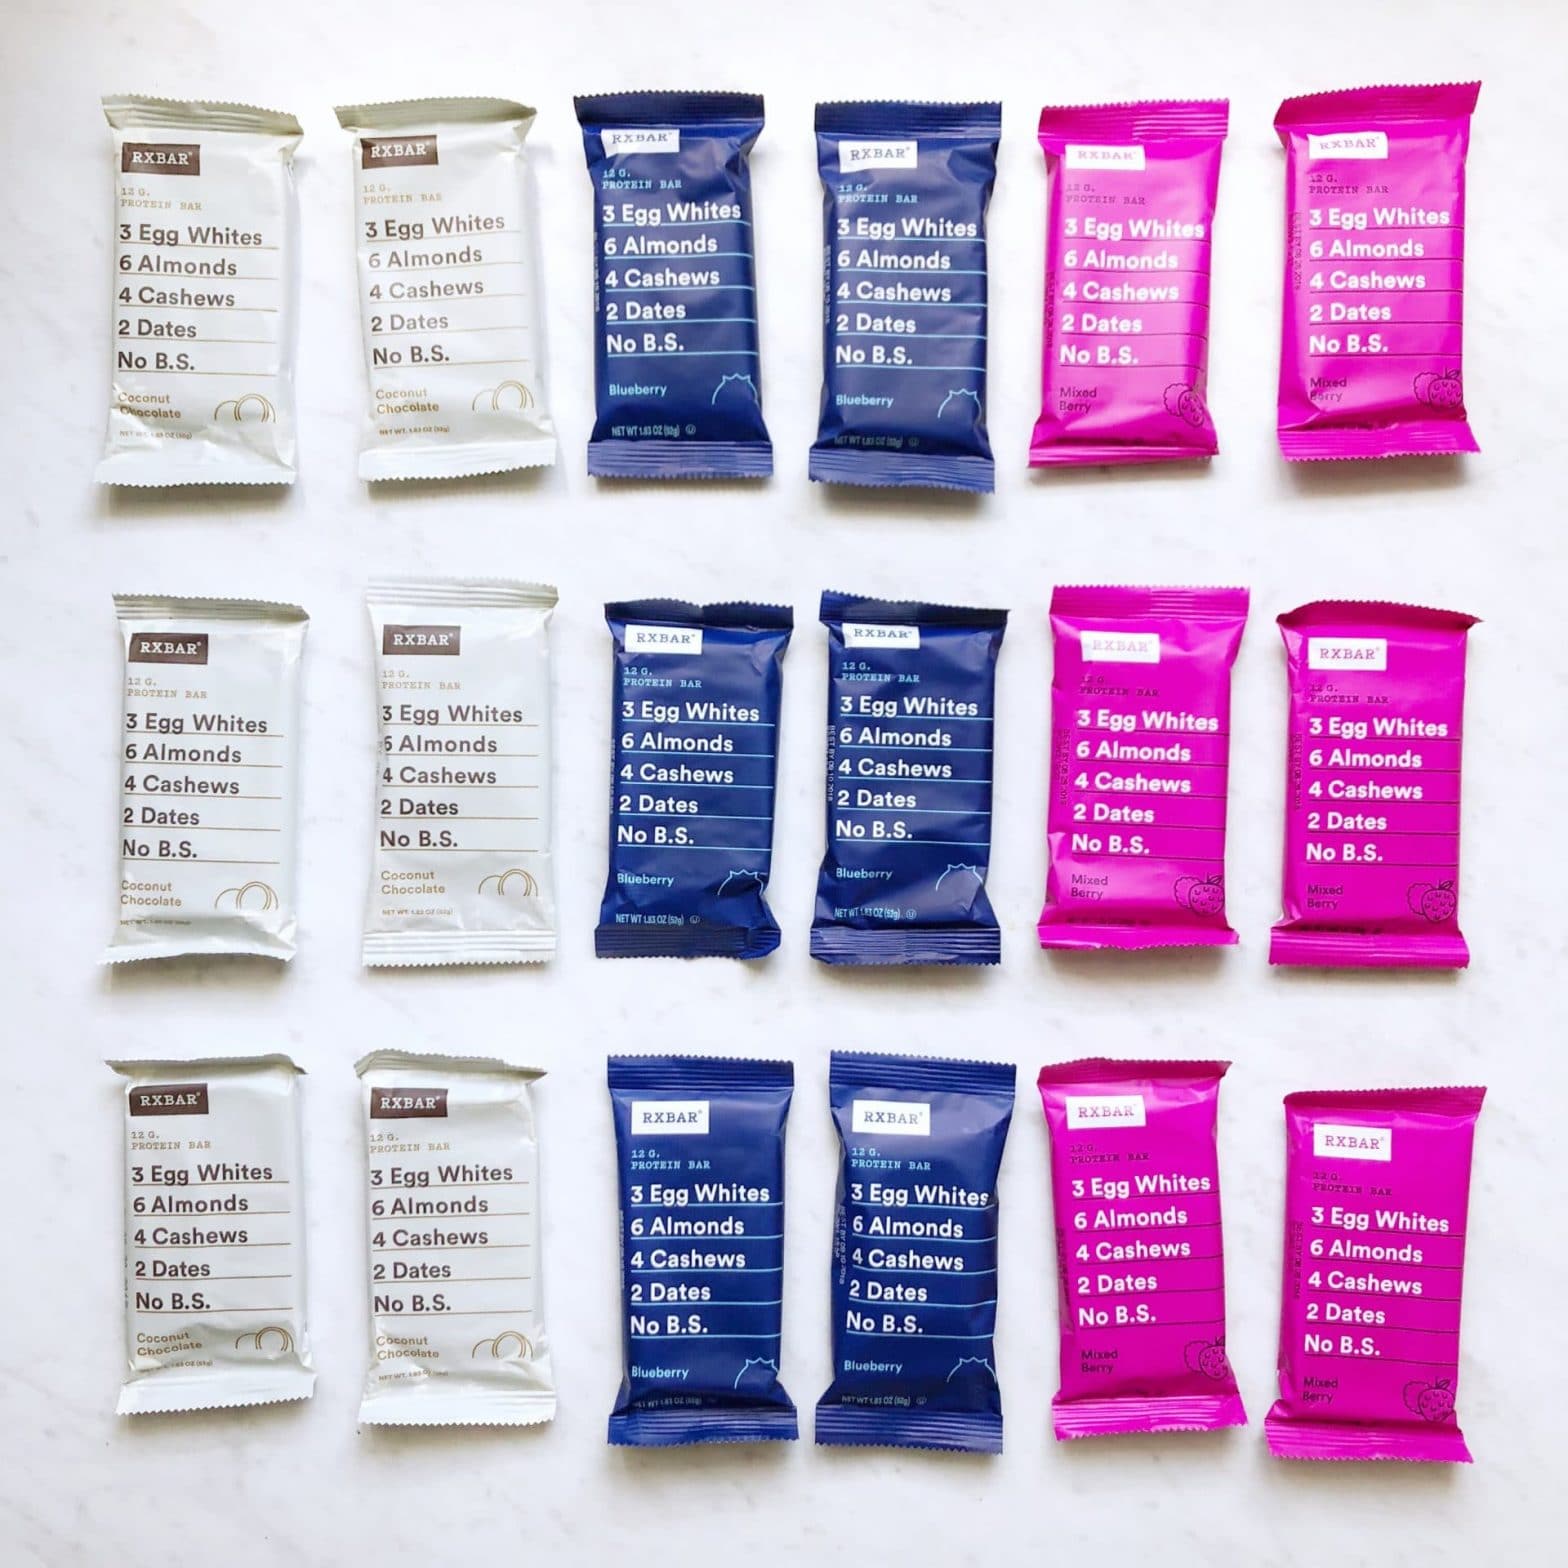 Whole30 RxBars: Which are approved? When can you eat them?